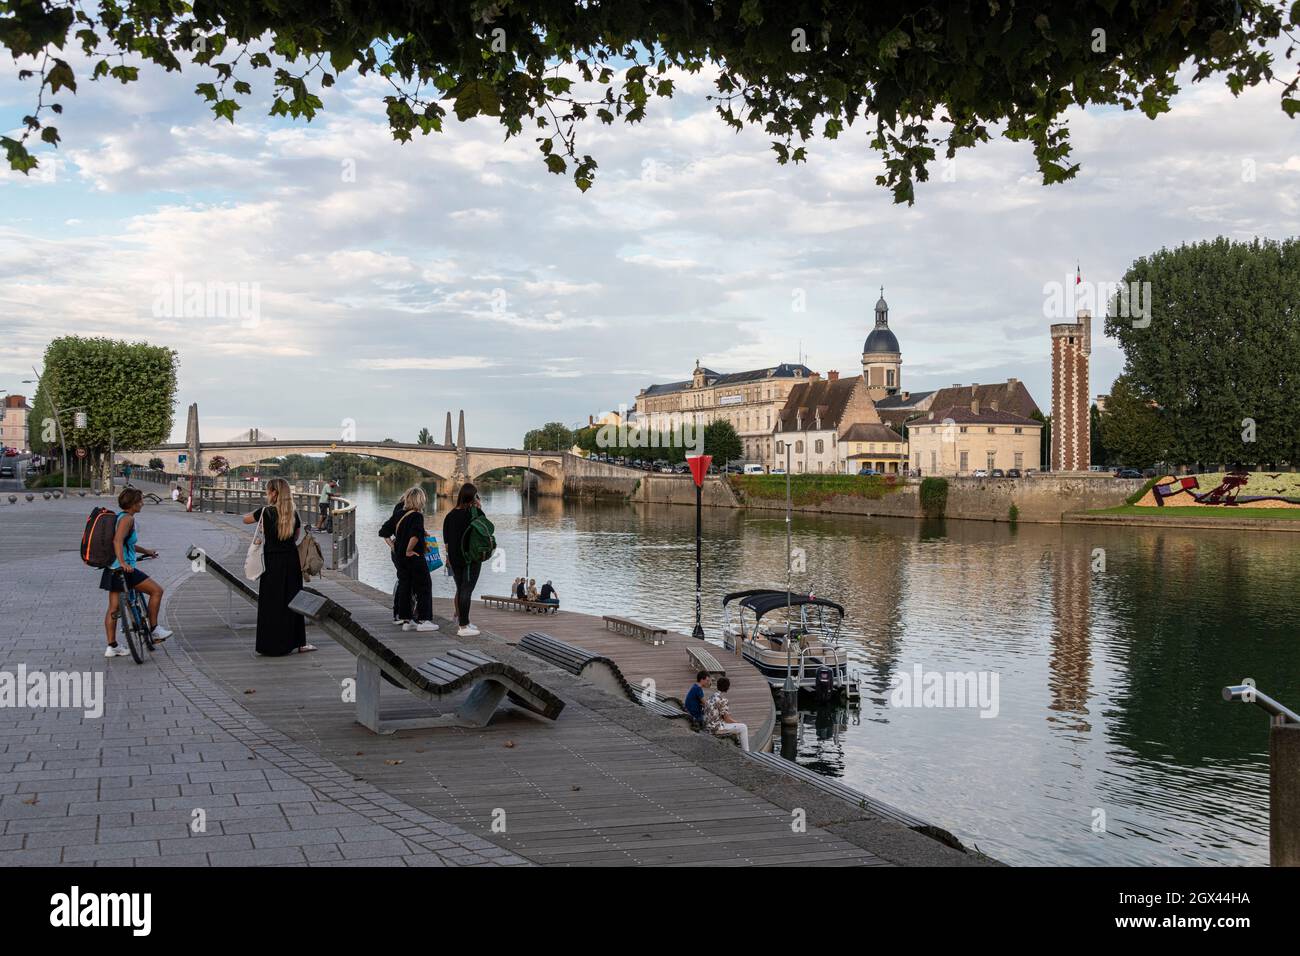 People Talk by the River Saone overlooking the Island of Saint Laurent, Chalon-Sur-Saone, Eastern France. Stock Photo